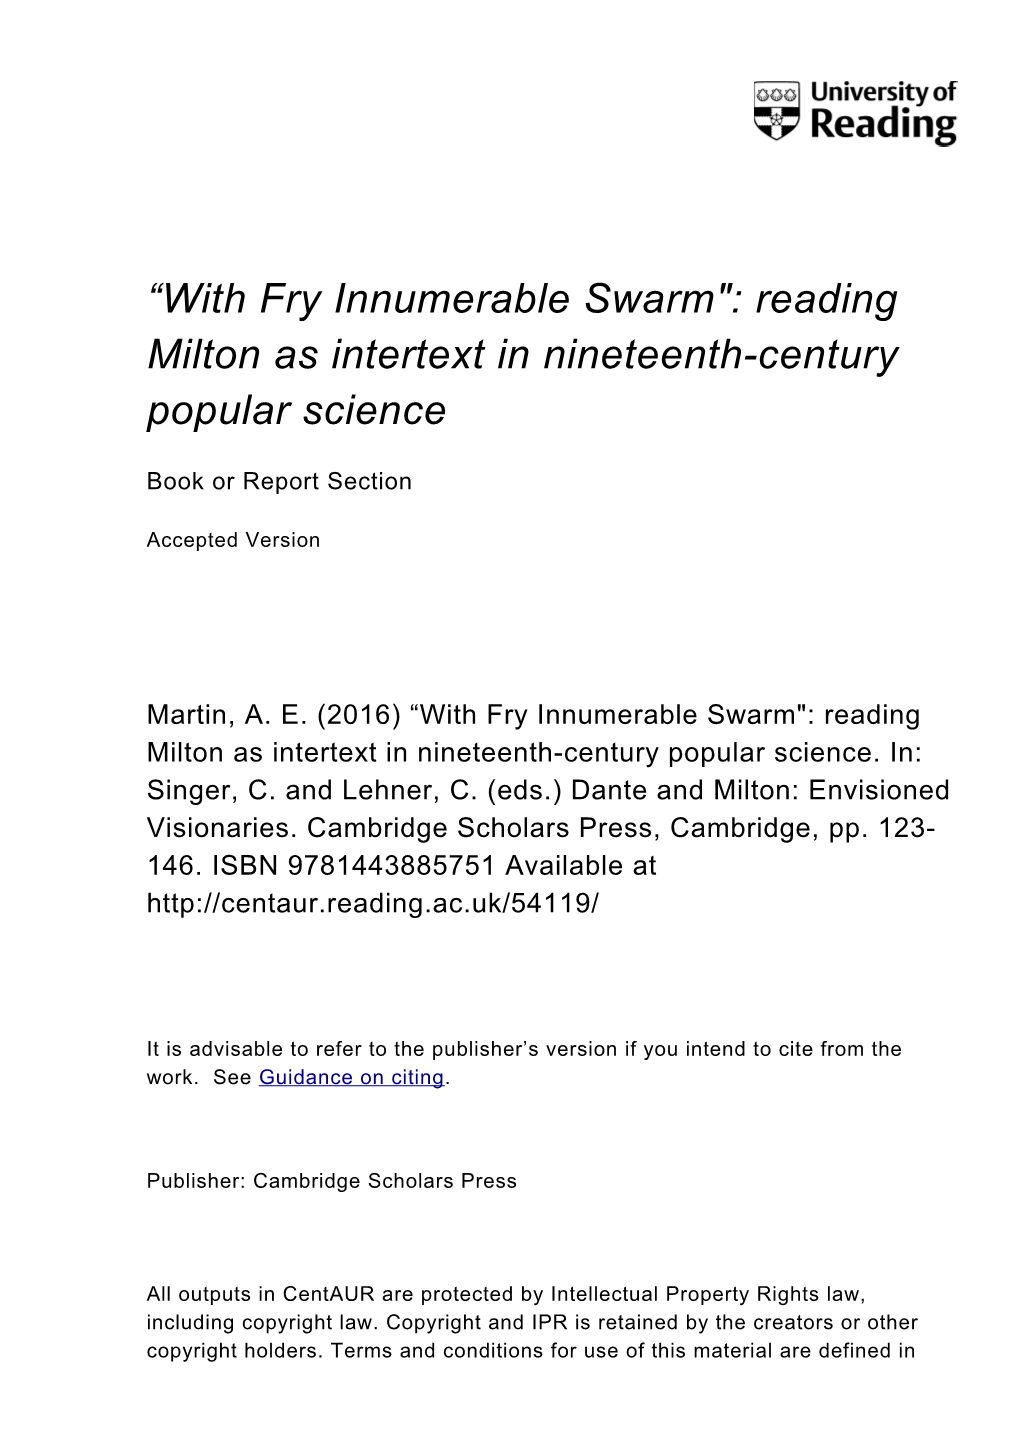 With Fry Innumerable Swarm": Reading Milton As Intertext in Nineteenth-Century Popular Science